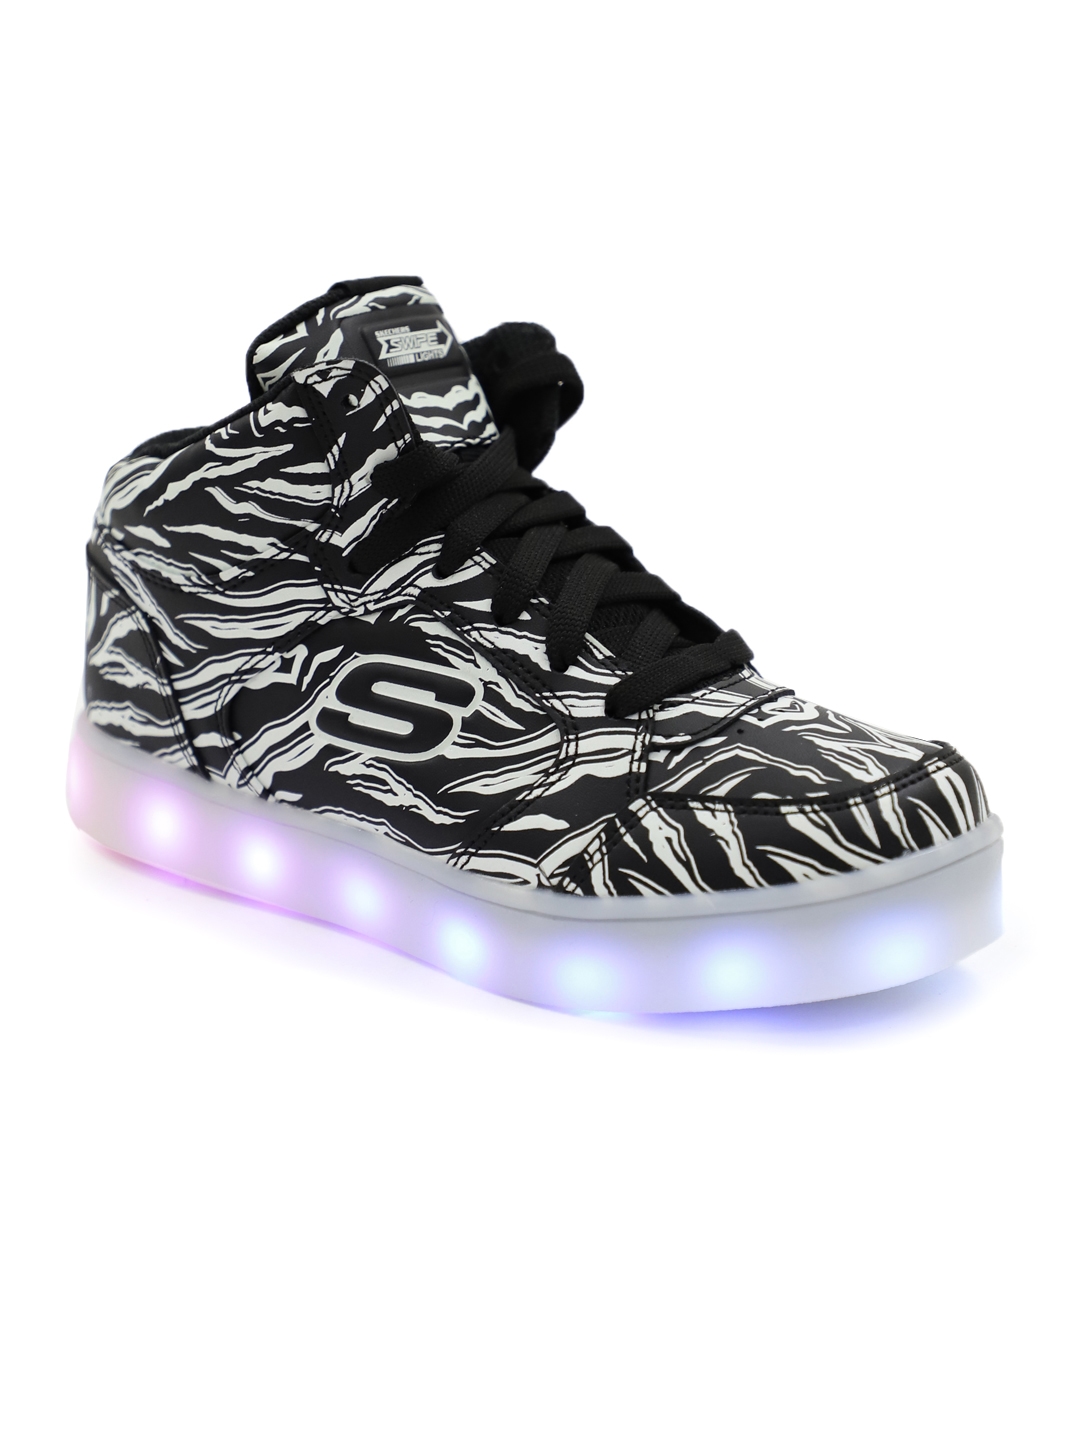 skechers kids shoes with lights